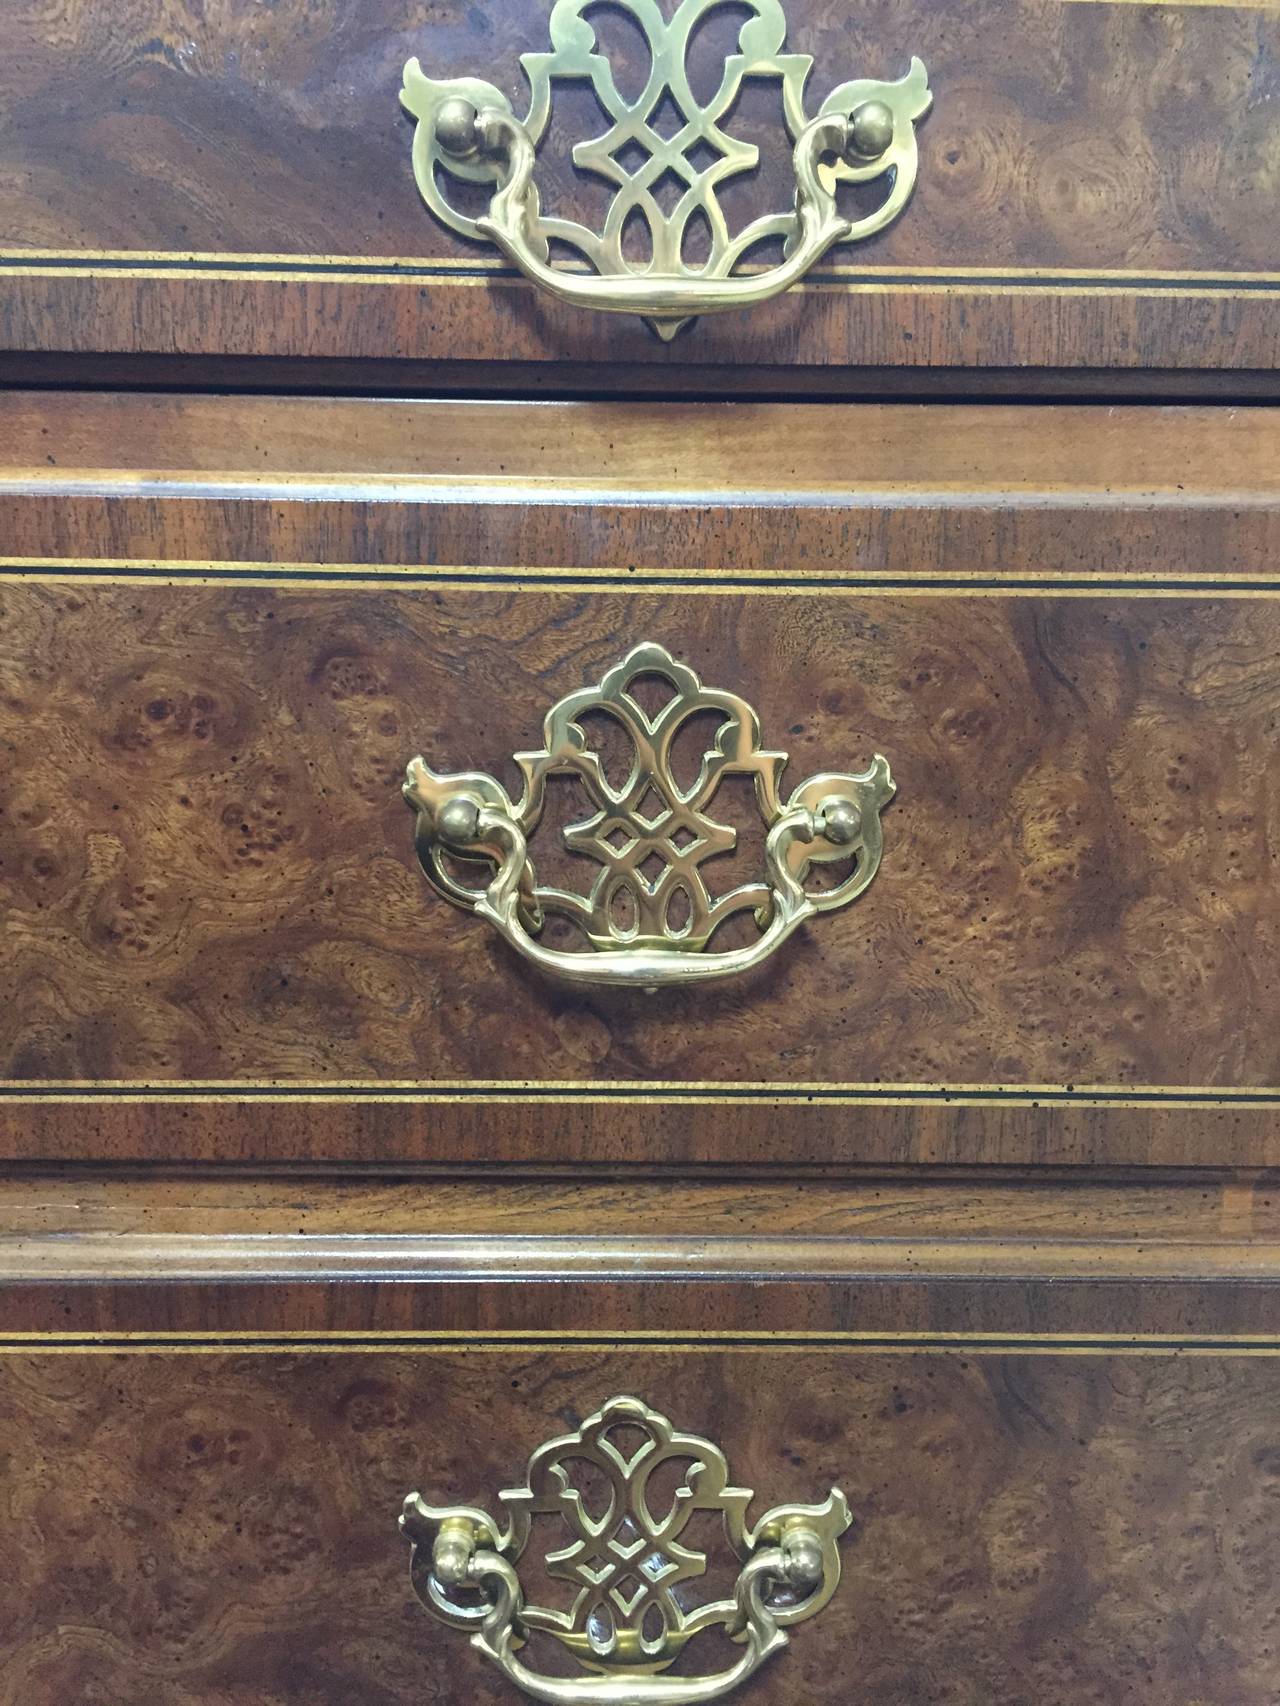 Burled Inlaid English KneeHole Desk with Chippendale style brass pulls